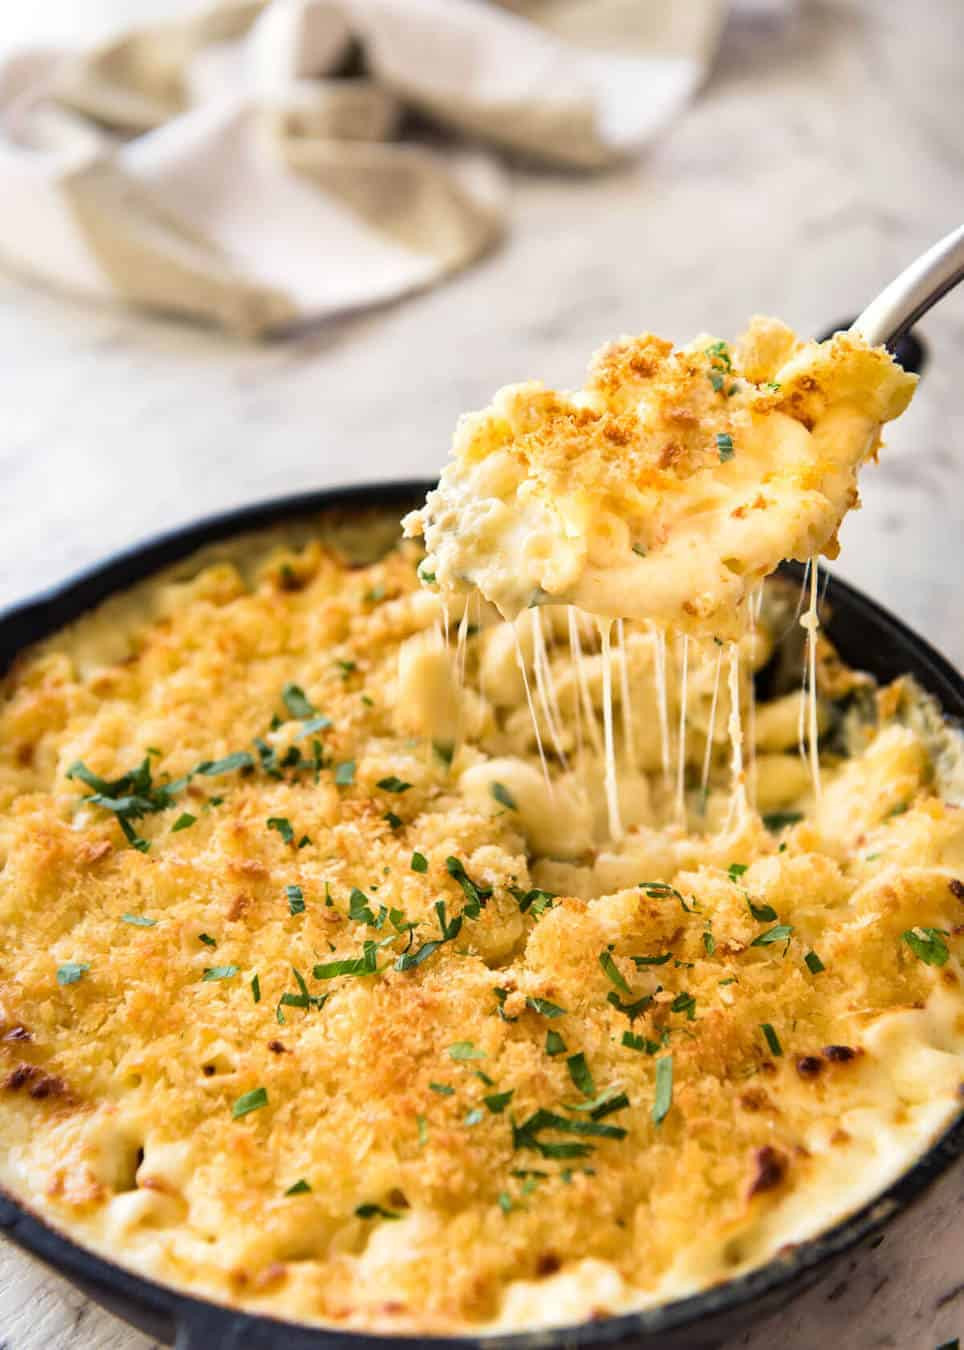 Best Baked Macaroni And Cheese Recipes
 Baked Mac and Cheese